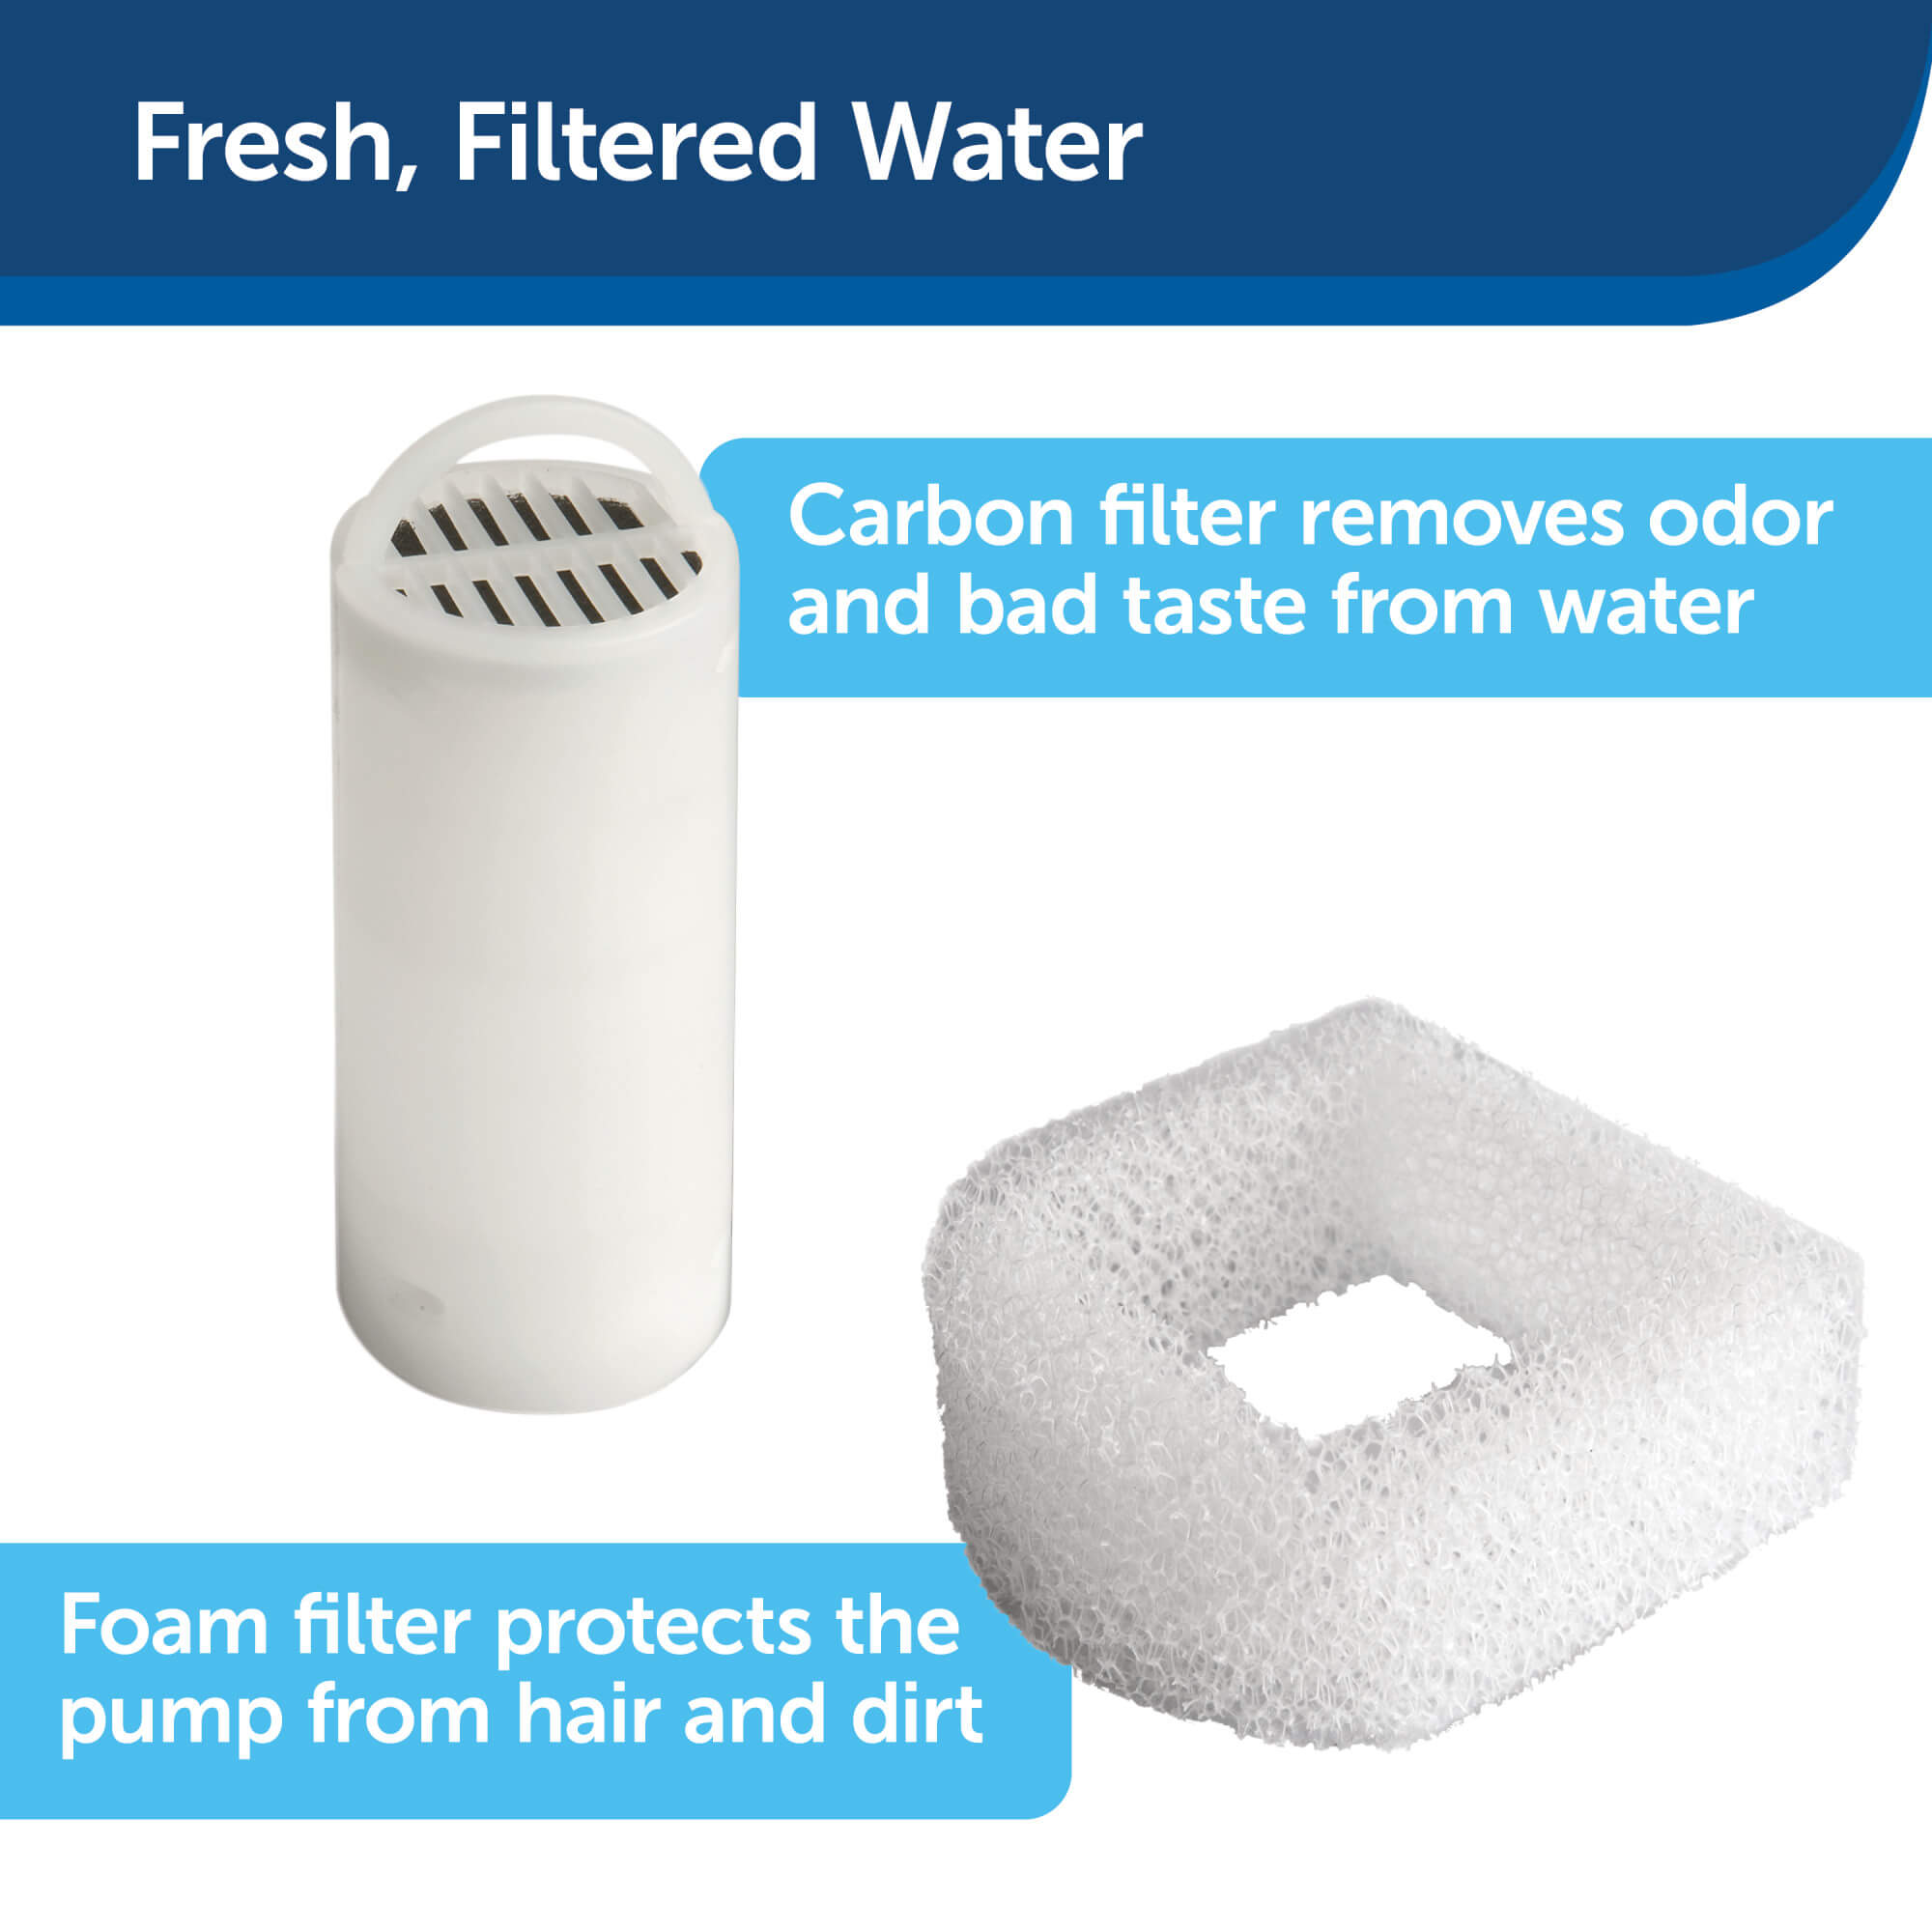 Fresh, filtered water